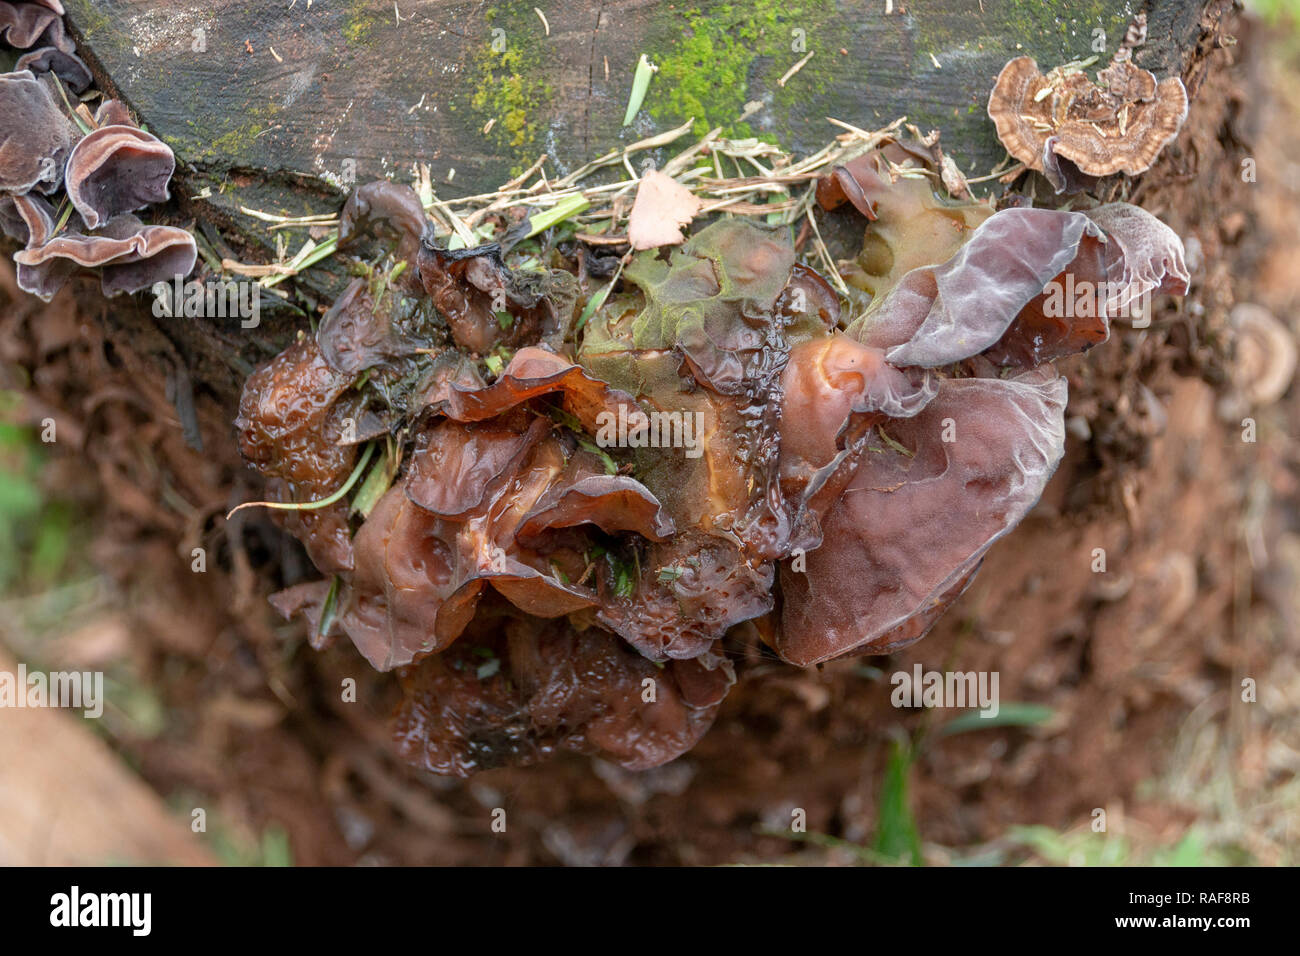 A close up front view of fungus growing on the side of a tree stump in the garden Stock Photo